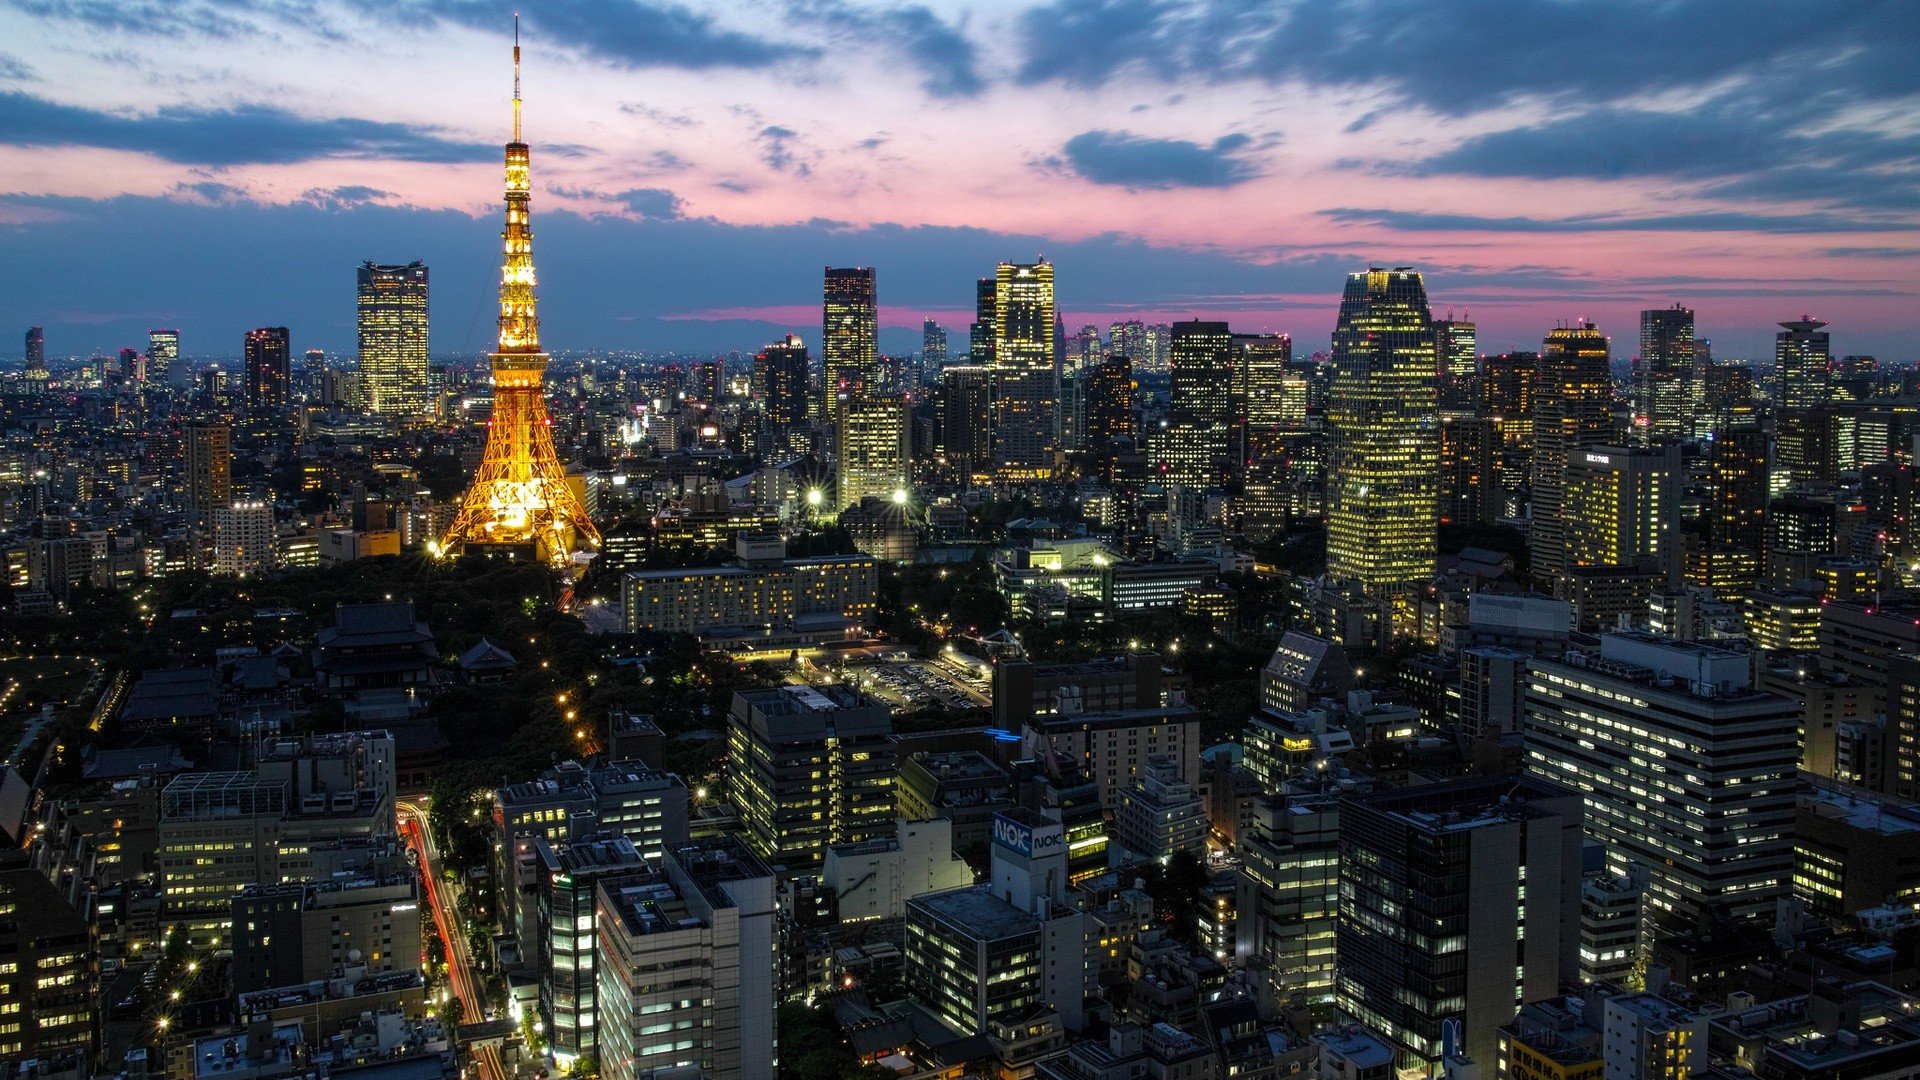 japan, Tokyo, Cityscapes, Tower, Houses, Skyscrapers, City, Lights, Dusk, Capital Wallpaper